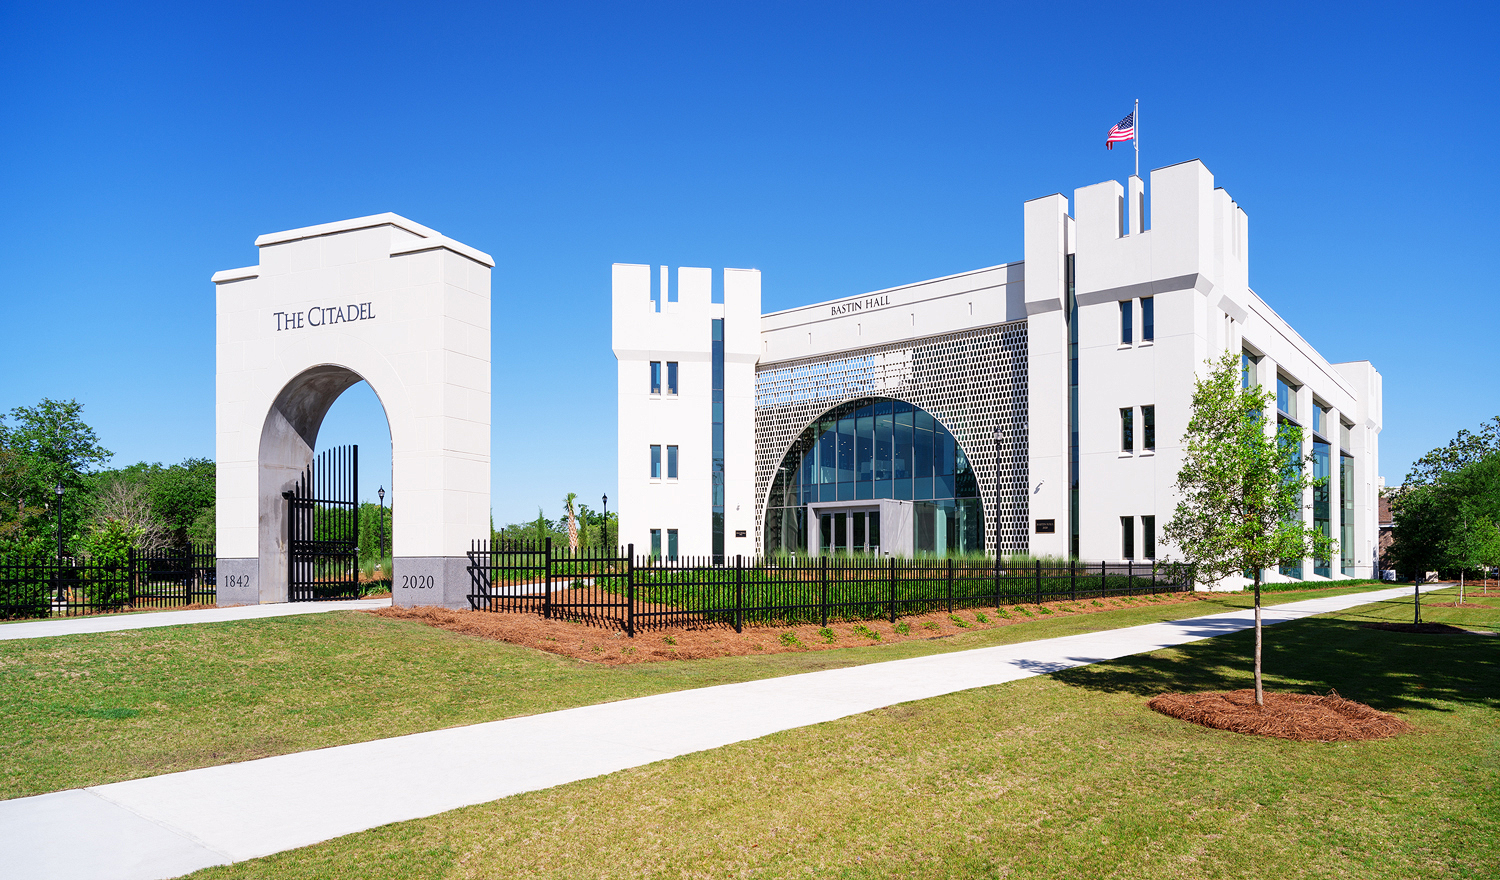 After two years of construction, The Citadel's Bastin Hall opened to students Spring 2021. Housing the Tommy and Victoria Baker School of Business, the building is a $25M investment in the latest educational space concepts and technology designed to foster creativity and collaboration. State-of-the-art audiovisual teaching tools are part of that investment